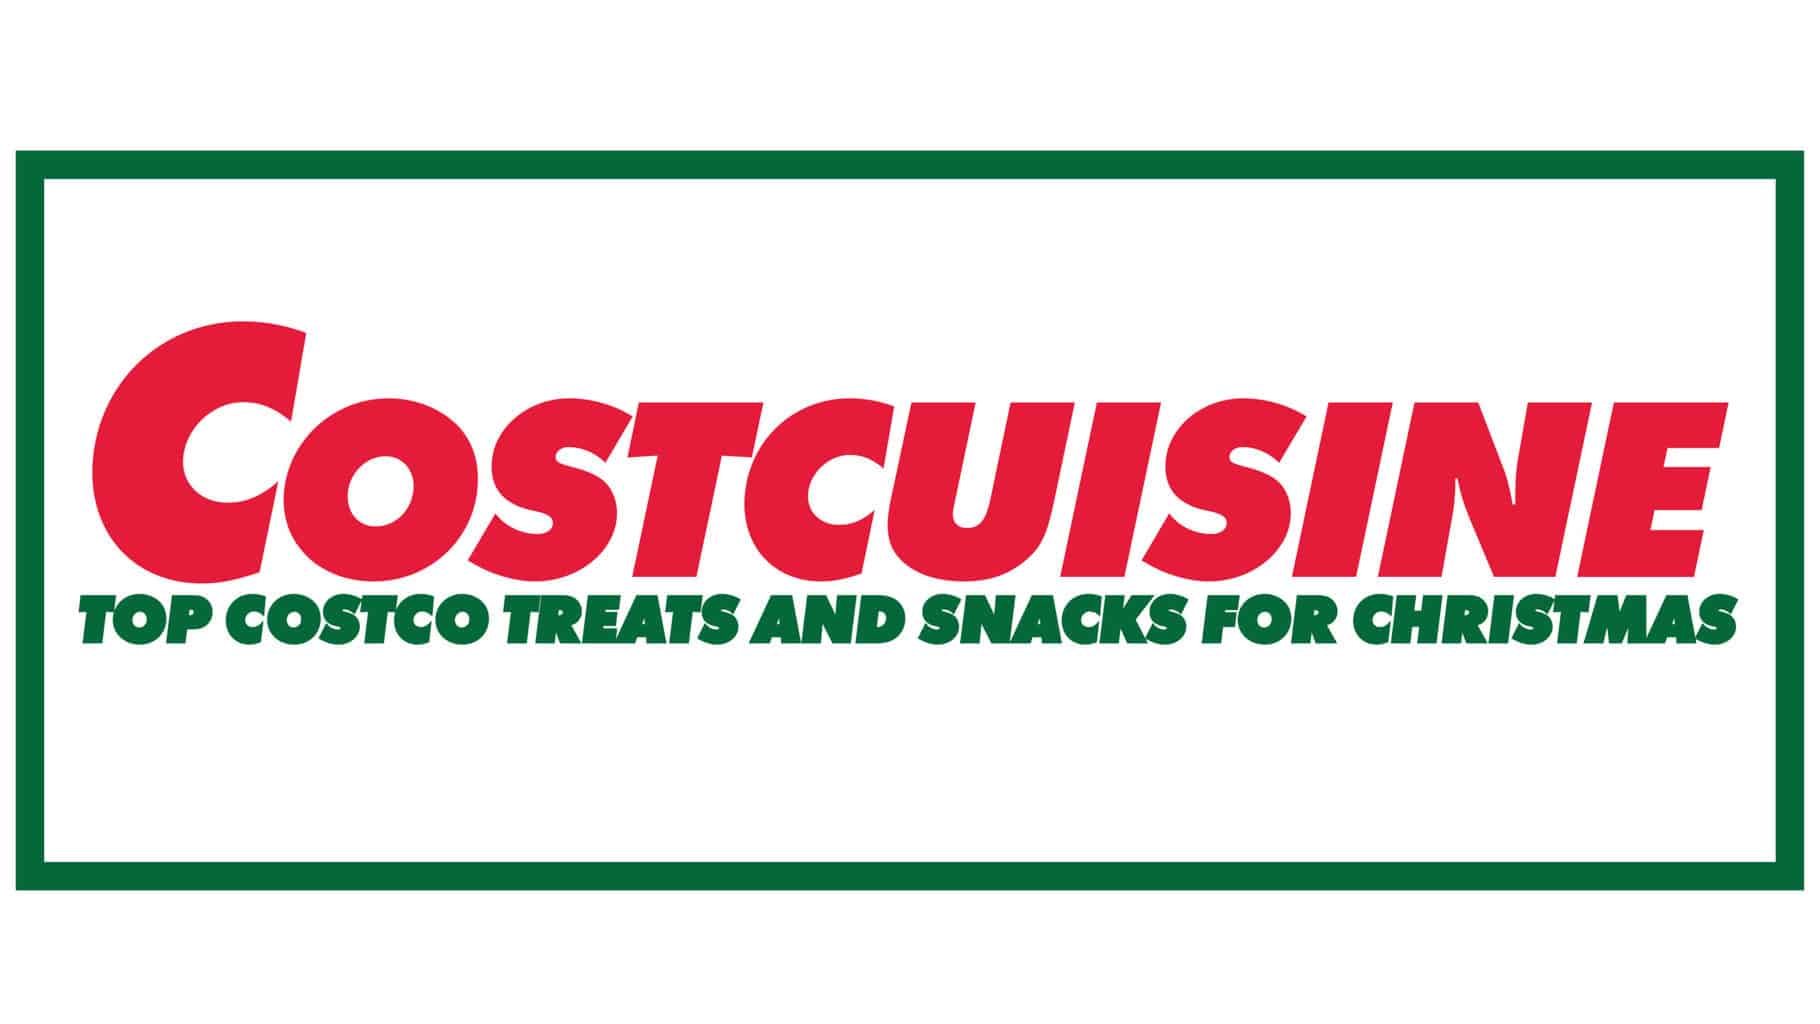 Title graphic - Top Costco Treats and Snacks for Christmas.